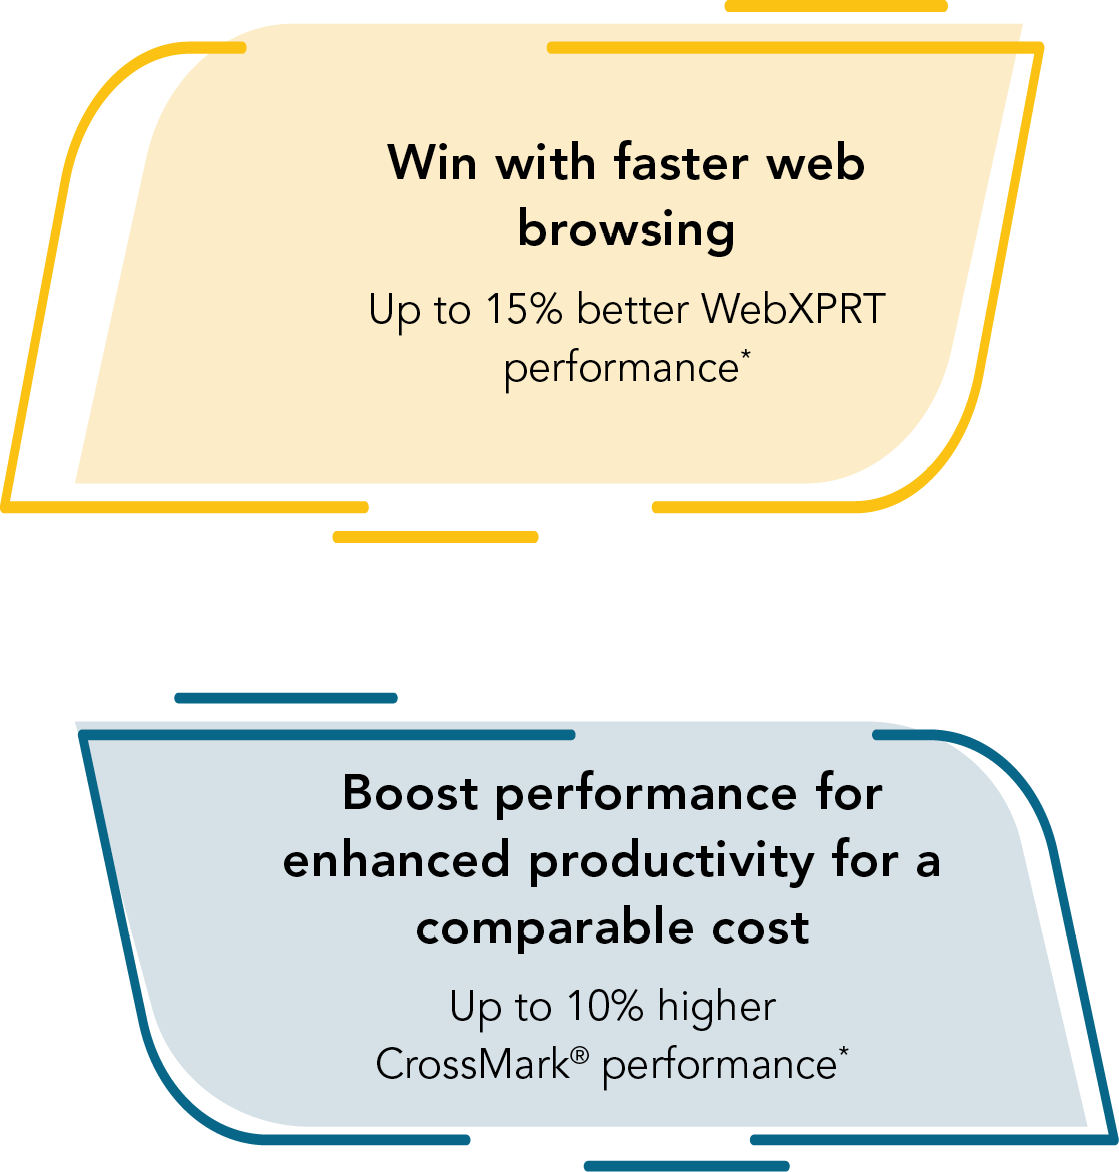 Win with faster web browsing: Up to 15% better WebXPRT performance with the HP Dragonfly Notebook PC G4 with an Intel Core i7-1365U vPro processor vs. the Apple MacBook Air 13 inch with an Apple M2 8-core processor. Boost performance for enhanced productivity for a comparable cost: Up to 10% higher CrossMark® performance with the HP Dragonfly Notebook 2 PC G4 with an Intel Core i7-1365U vPro processor vs. the Apple MacBook Air 13 inch with an Apple M2 8-core processor.